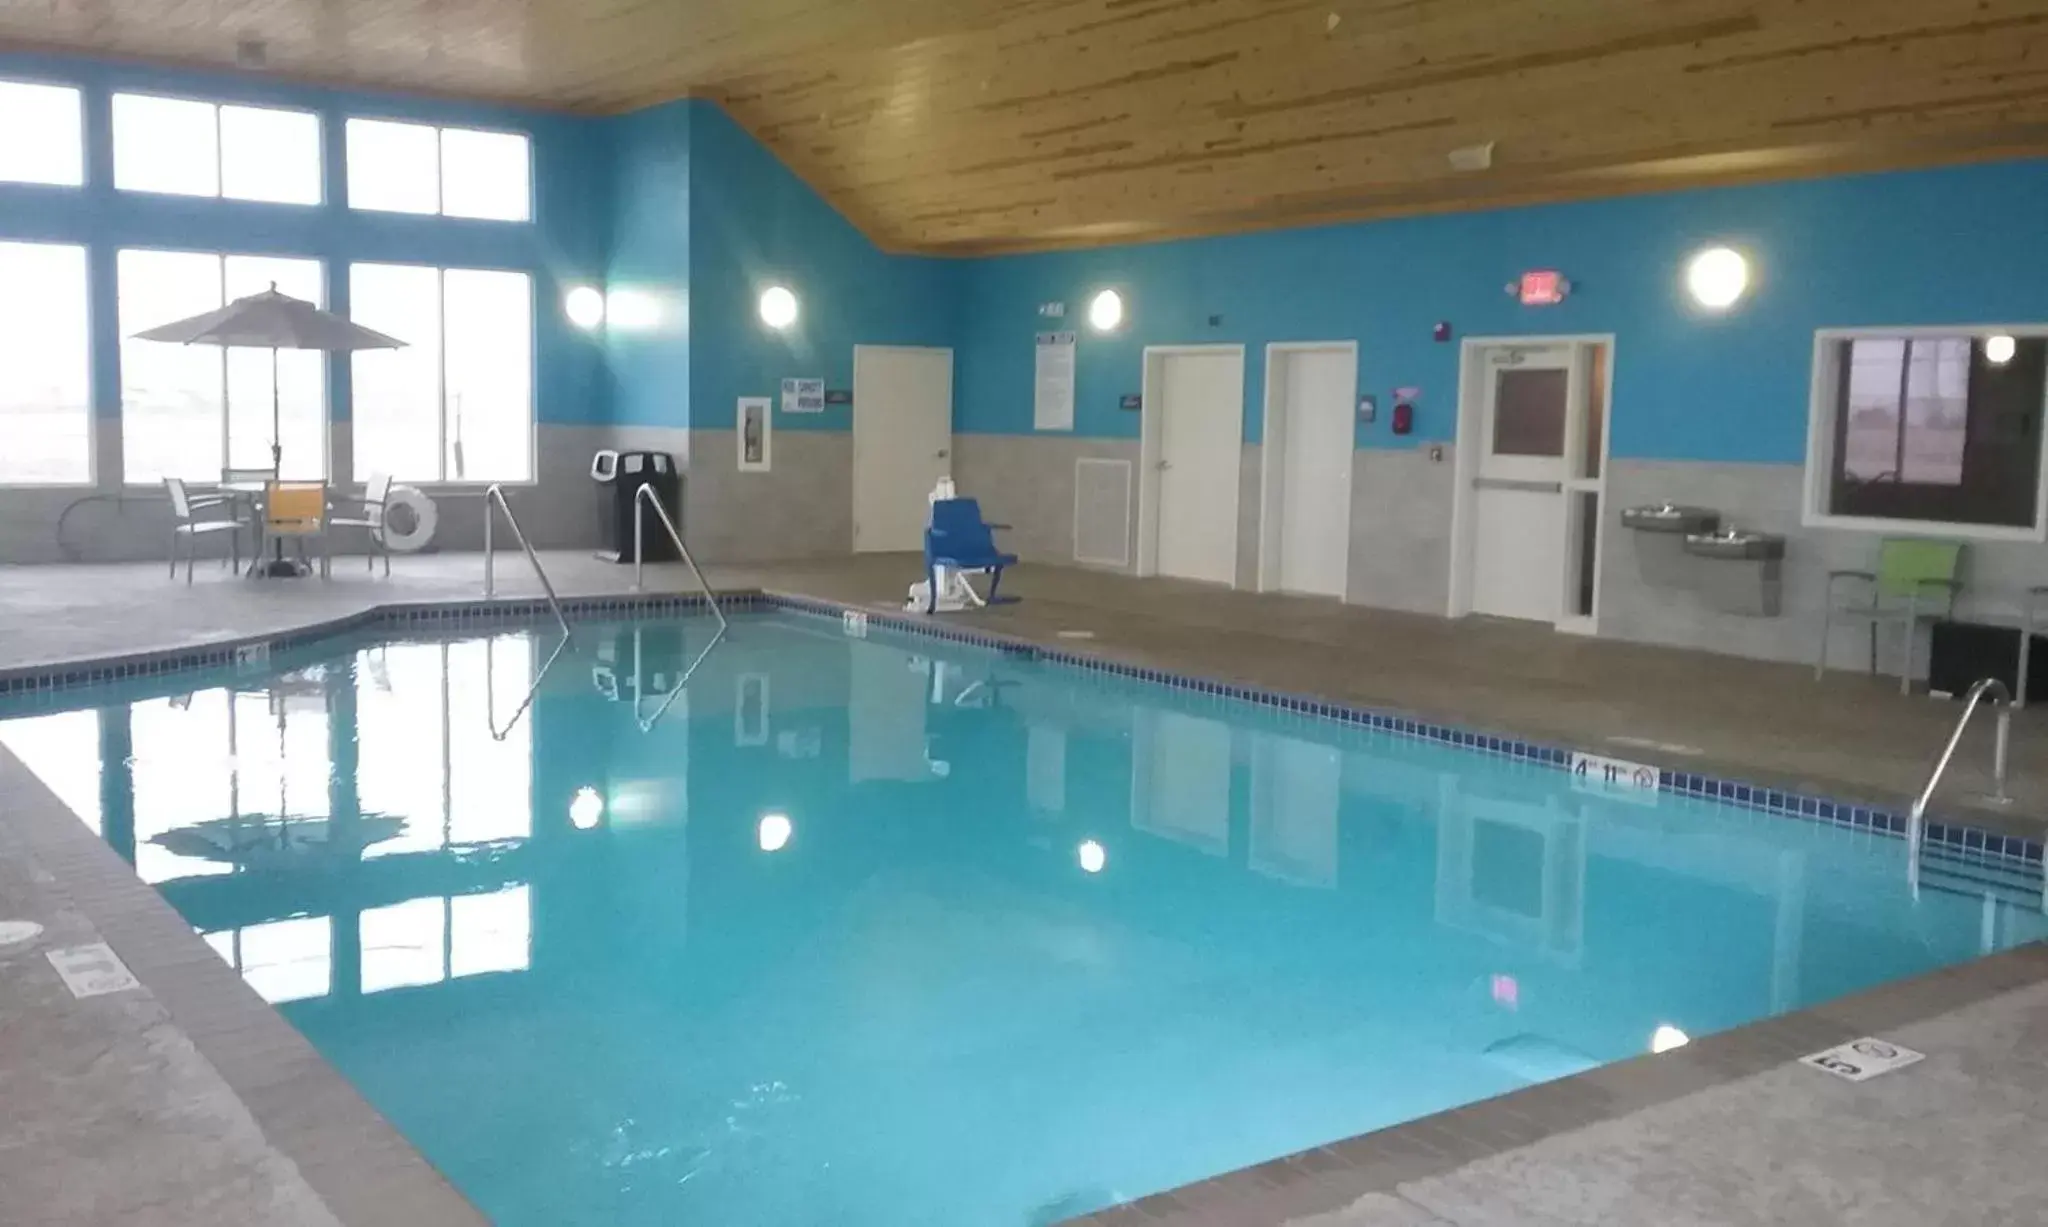 Swimming Pool in GrandStay Hotel and Suites - Tea/Sioux Falls